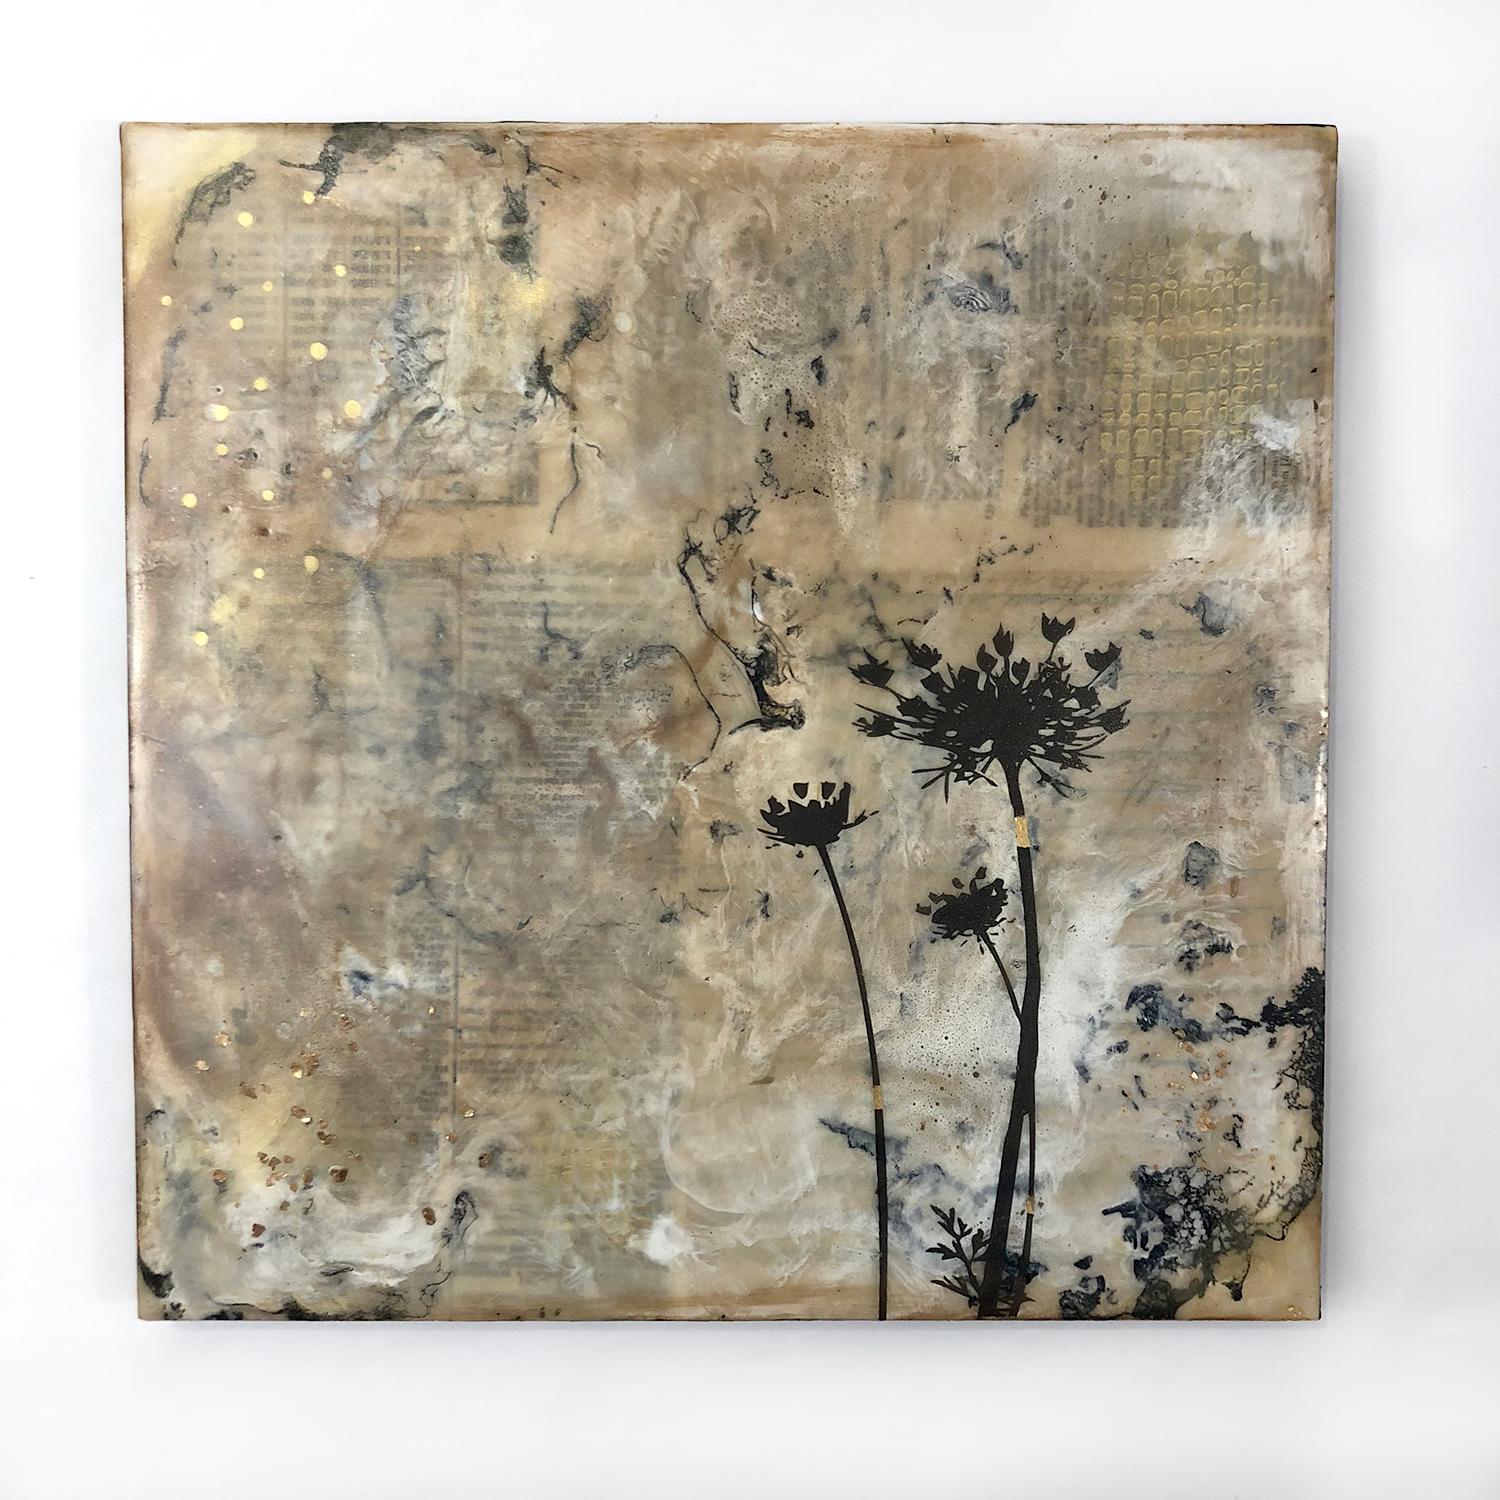 <p>Artist Comments<br />The beauty and simplicity of Queen Anne's Lace adorns this evocative painting. The background is made up of a variety of vintage ephemeral materials including old book pages, maps, letters and more. They quietly peek out in